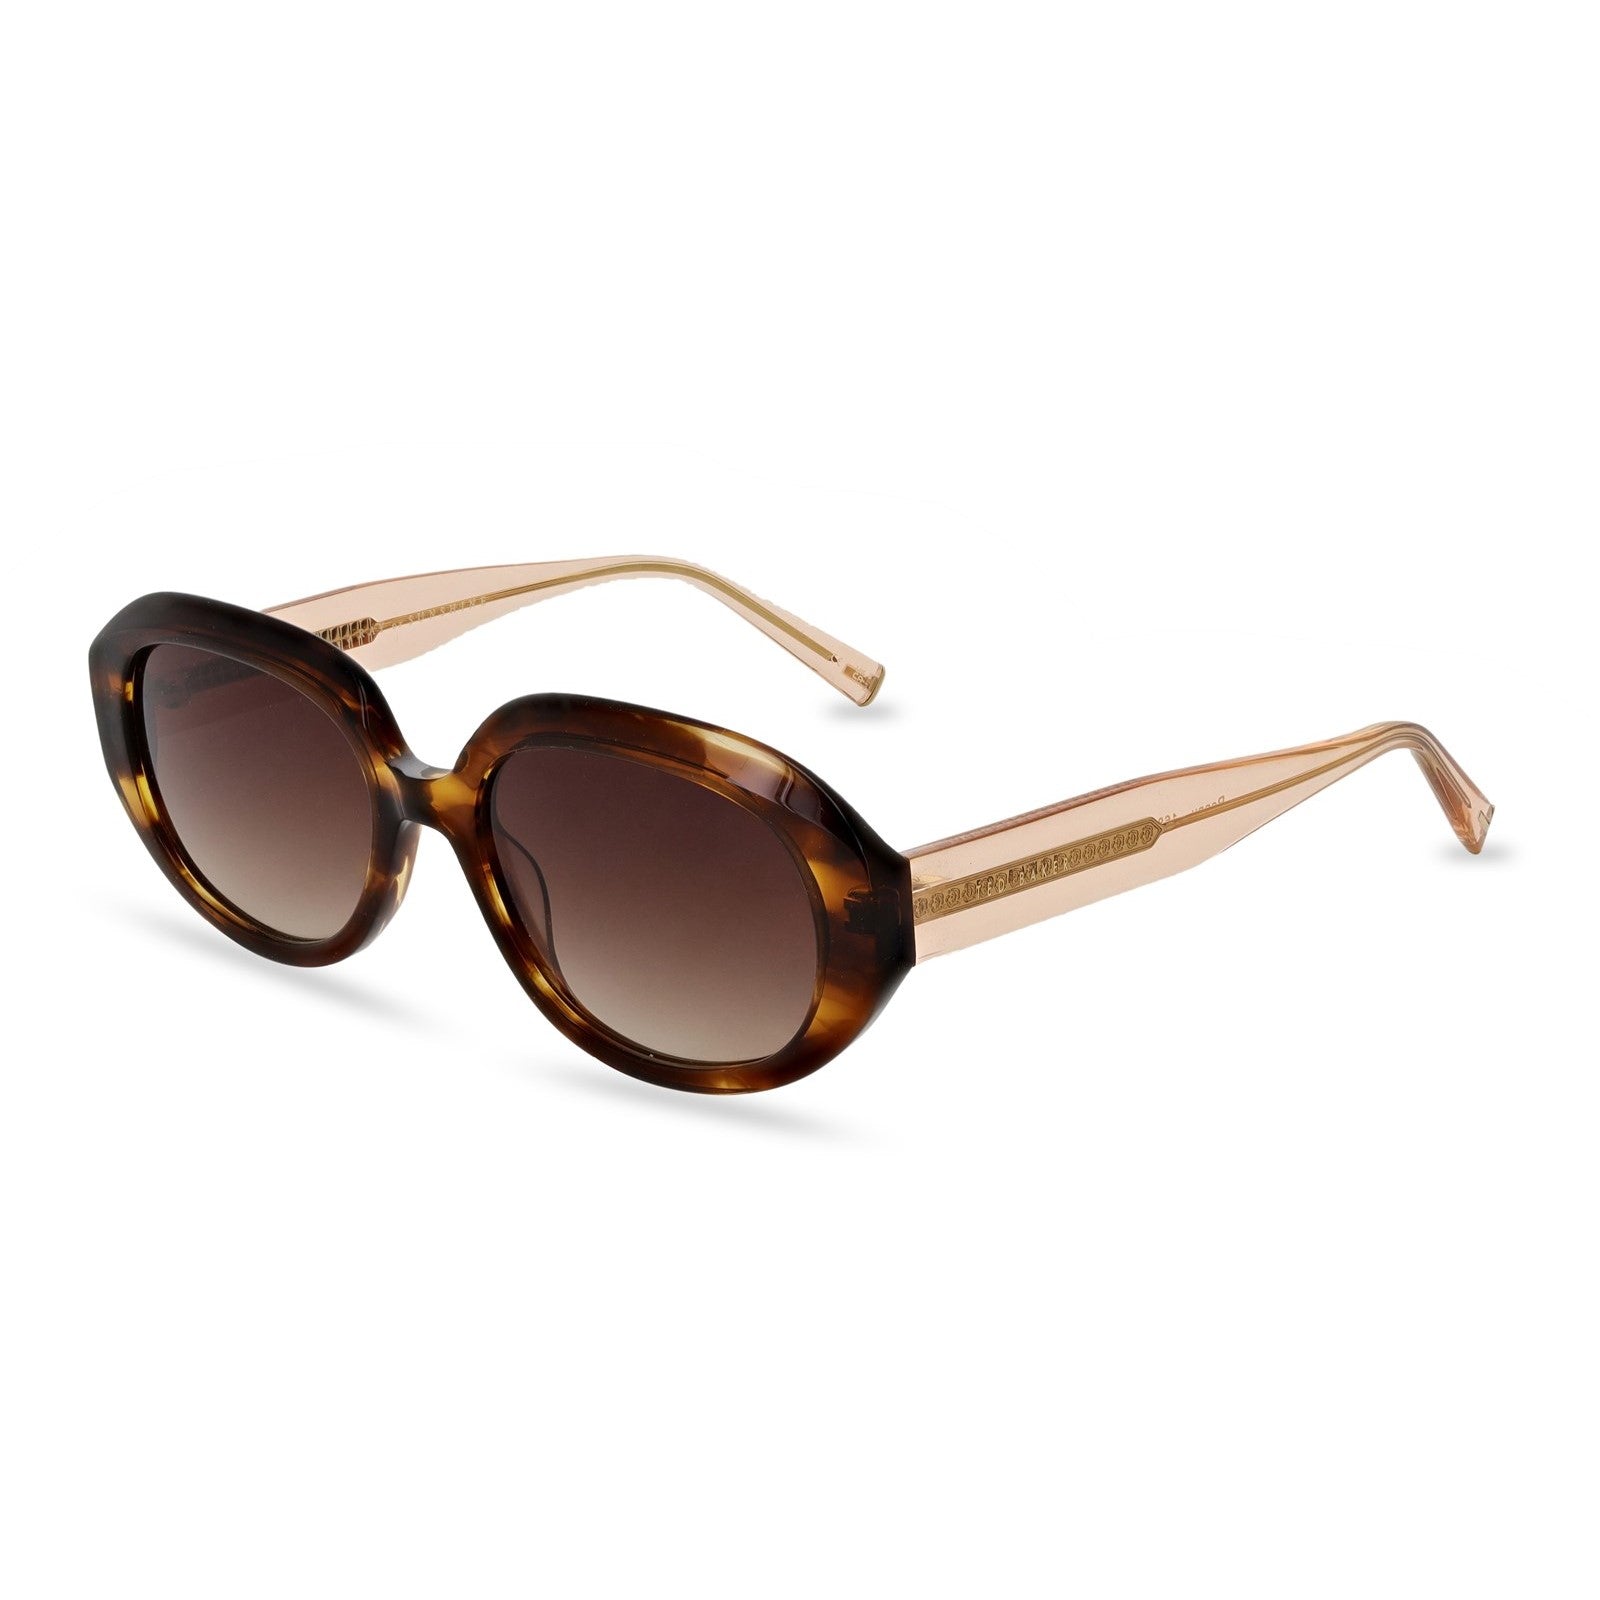 Ted Baker Penny Sunglasses Shoes